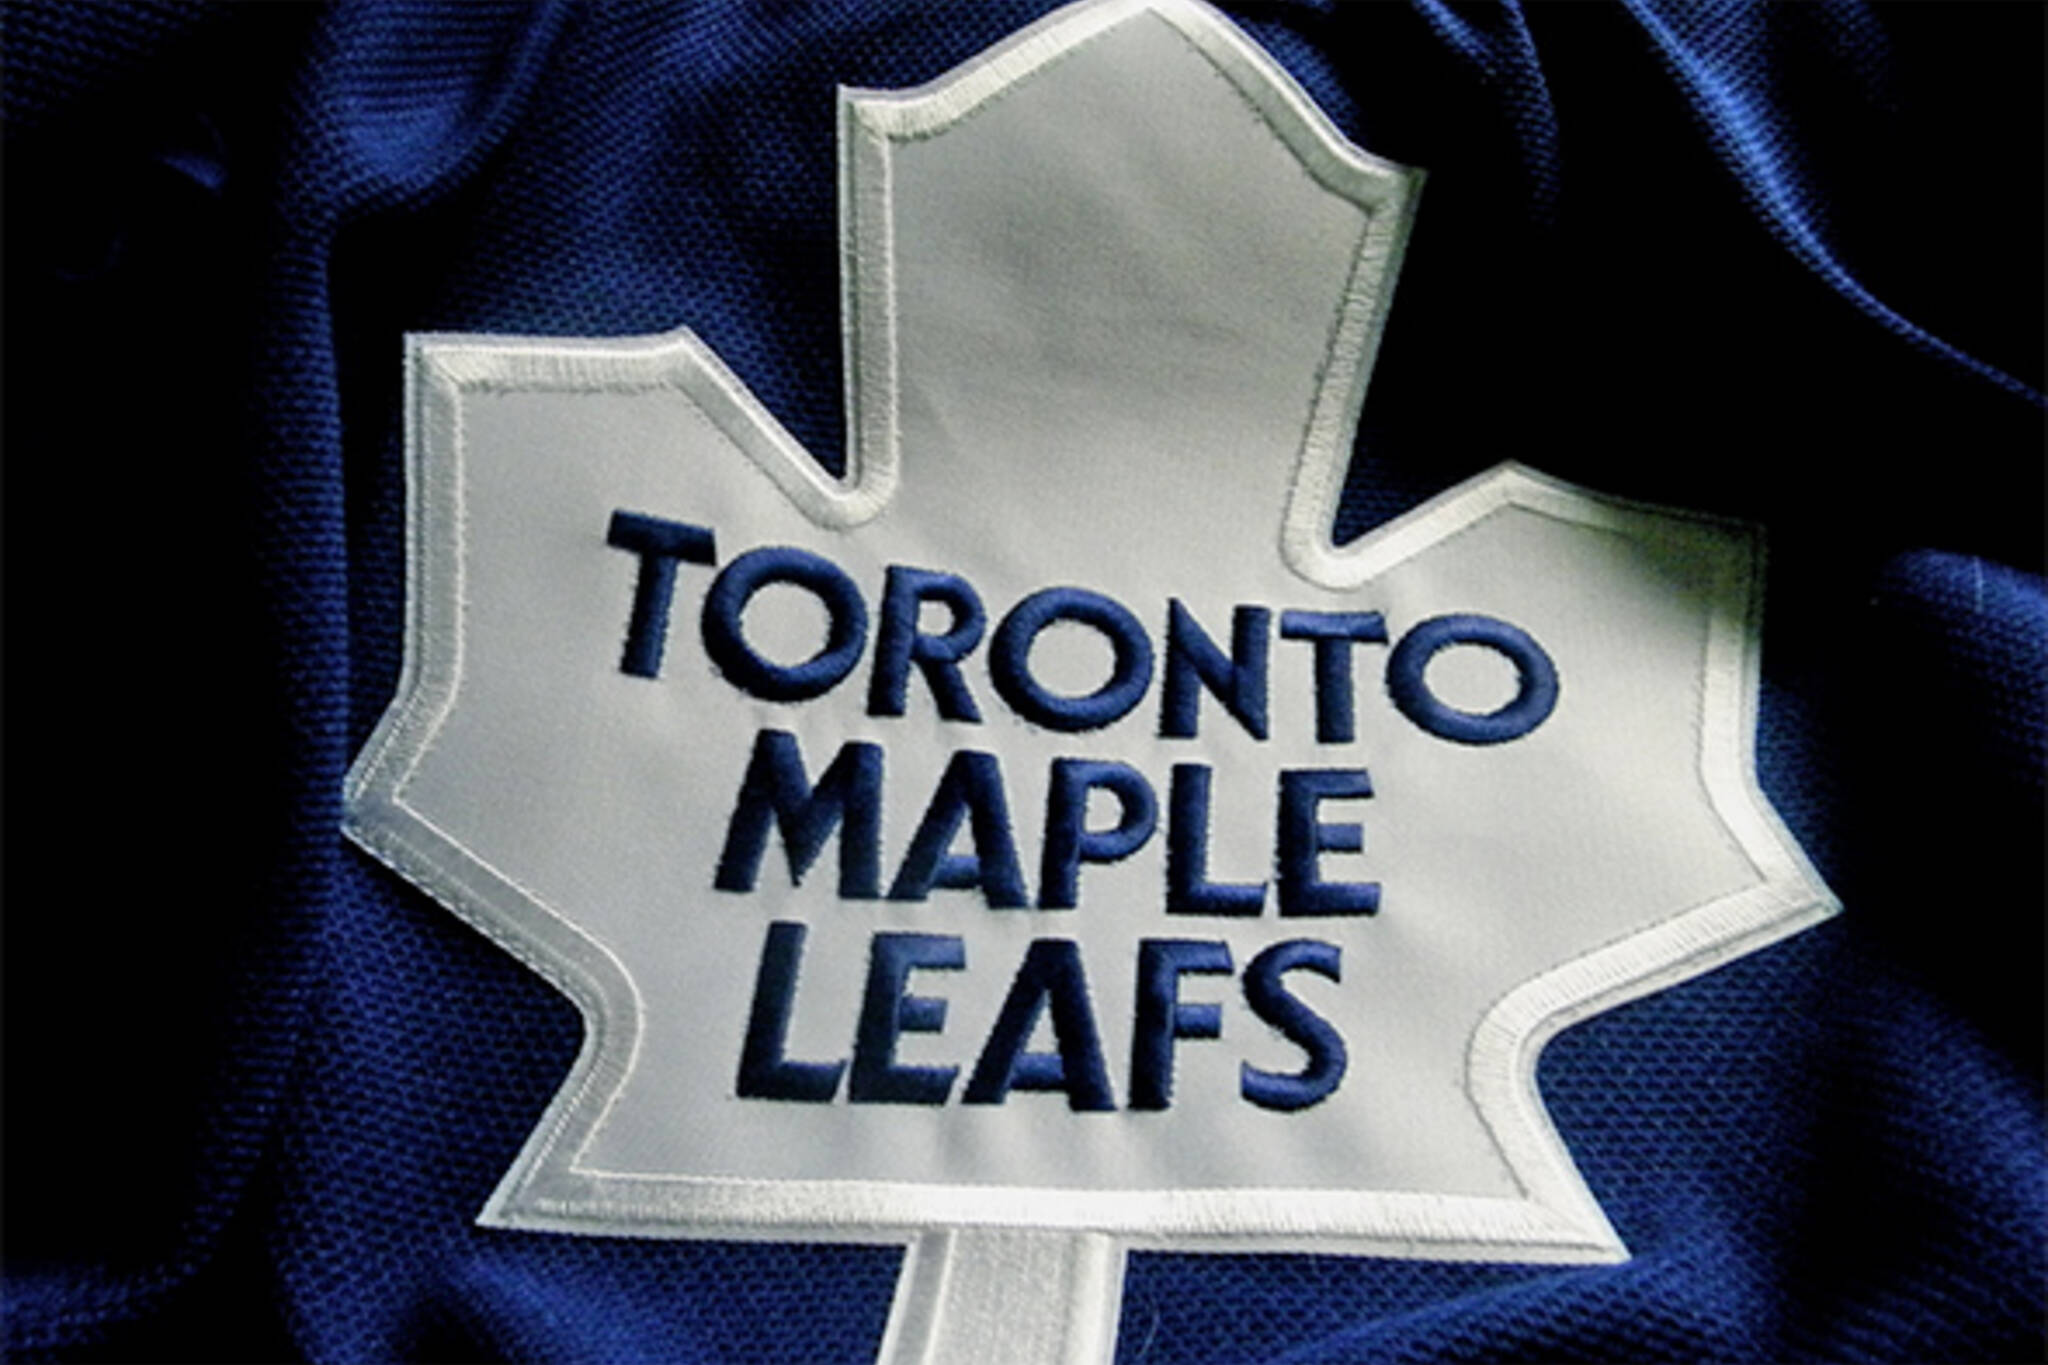 Leafs jersey ice